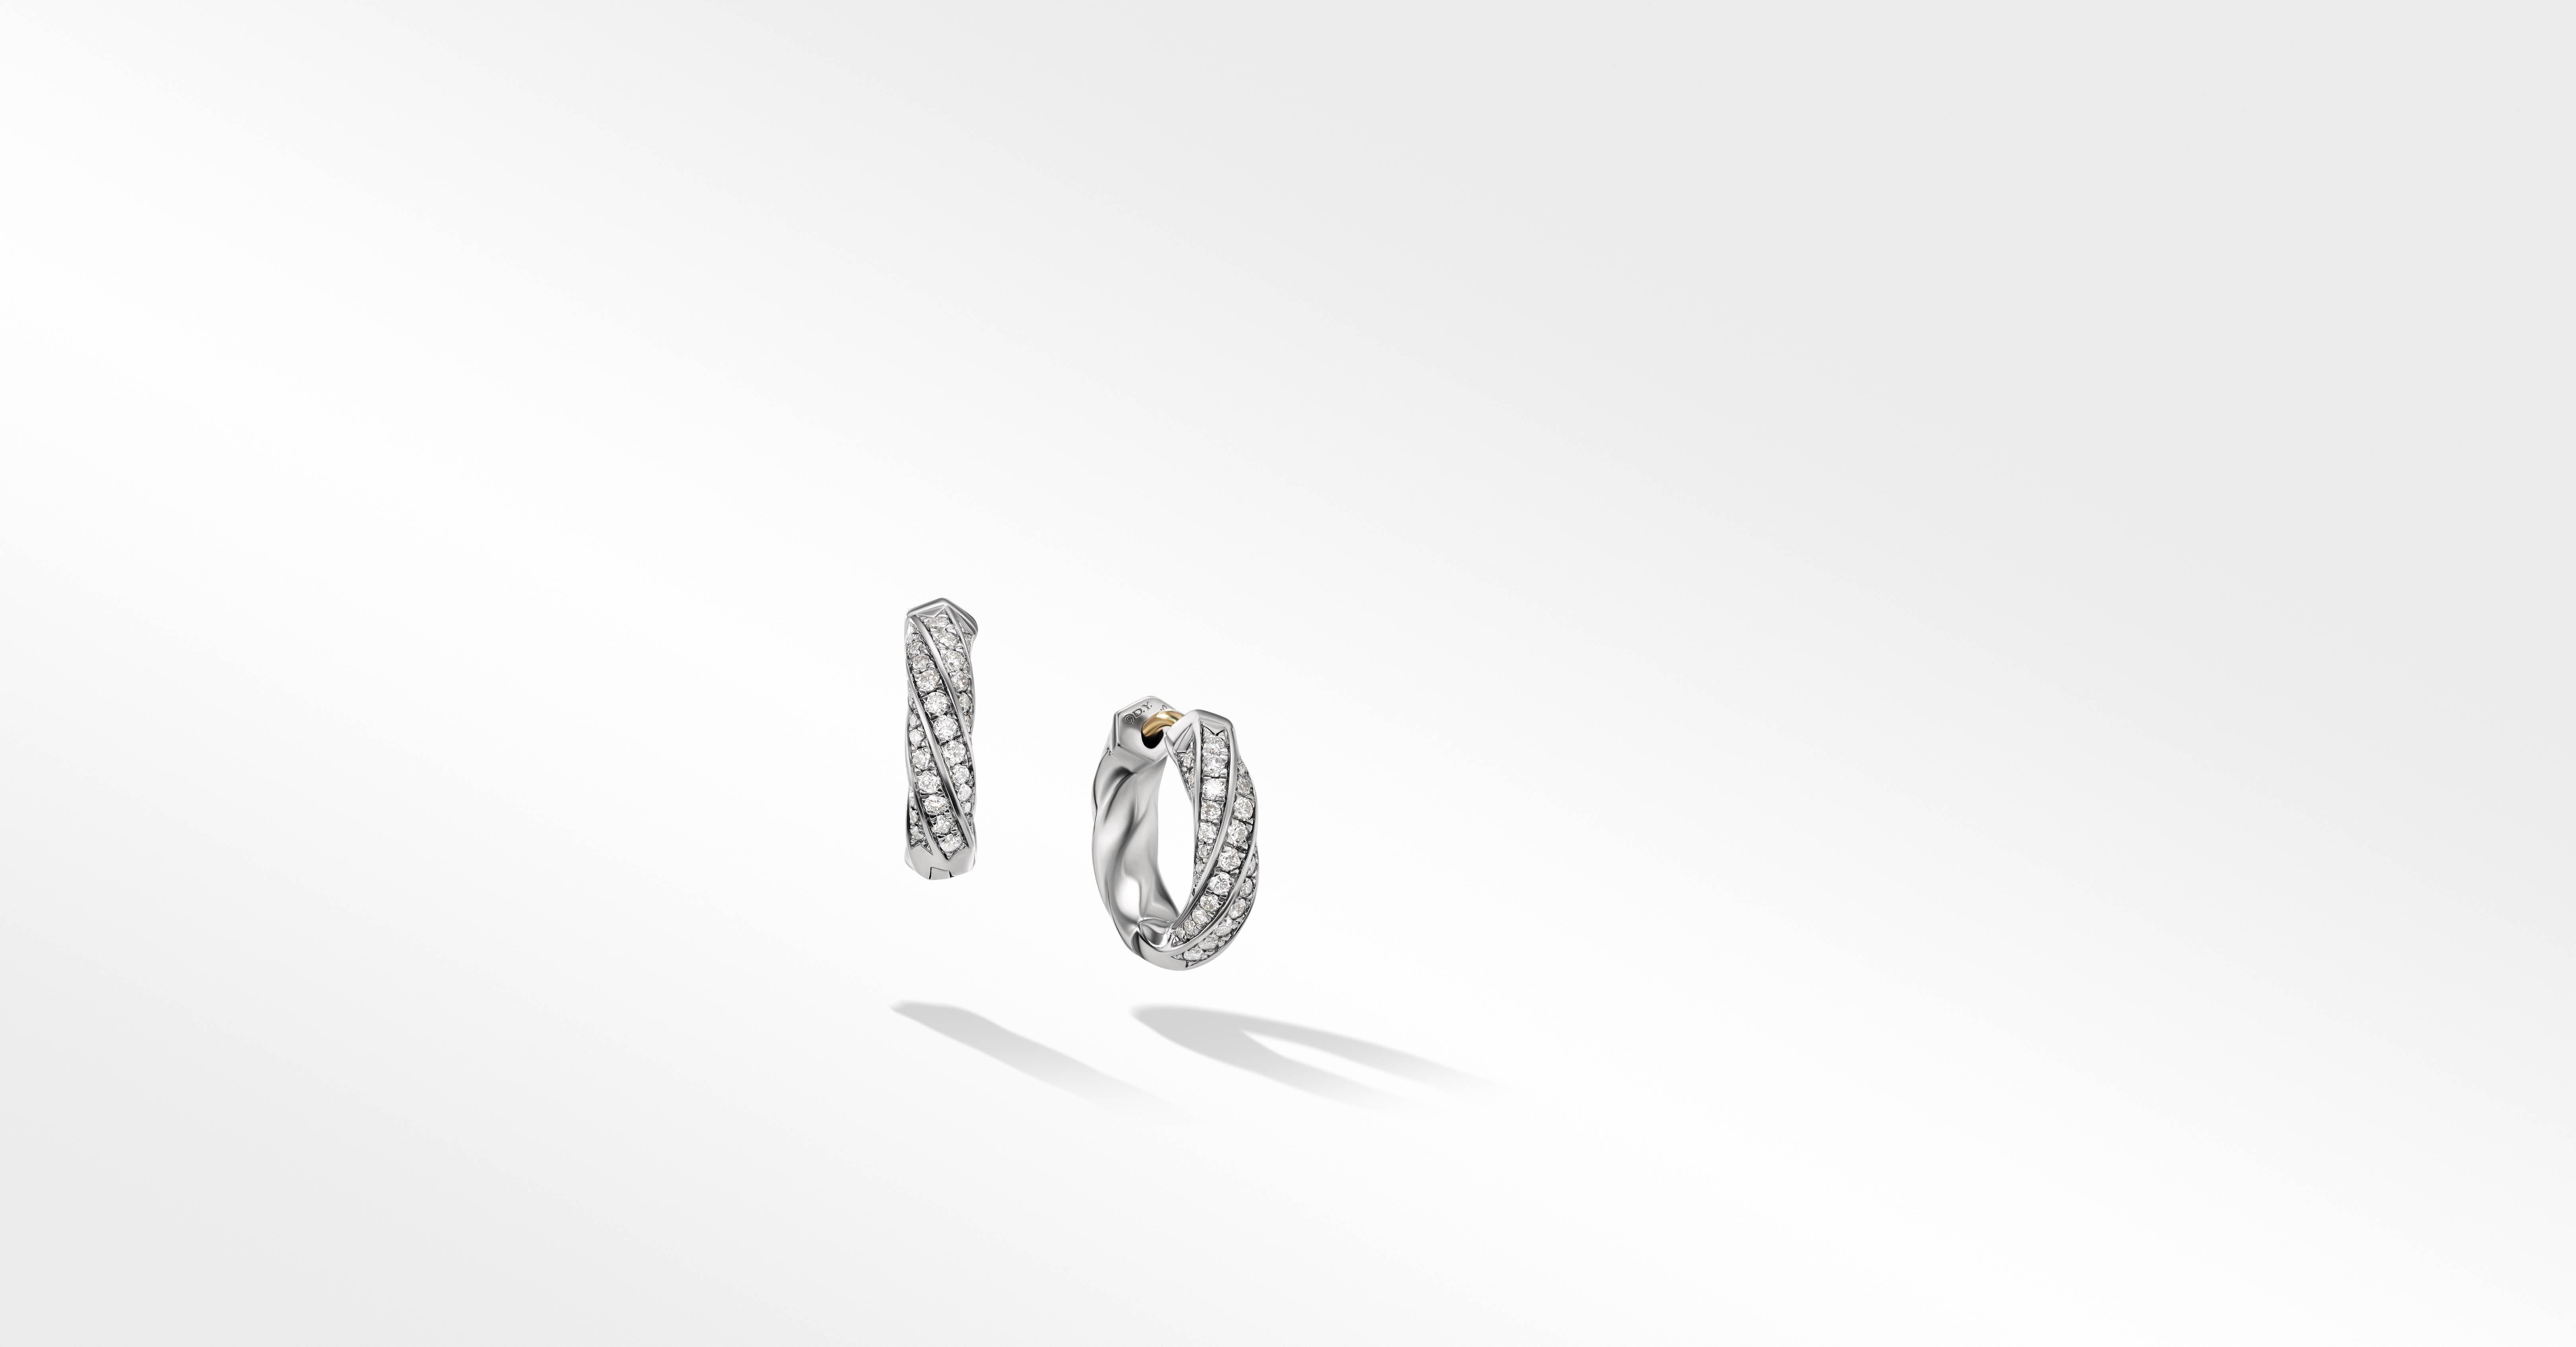 David Yurman | Cable Edge™ Huggie Hoop Earrings in Recycled Sterling Silver with Pavé Diamonds